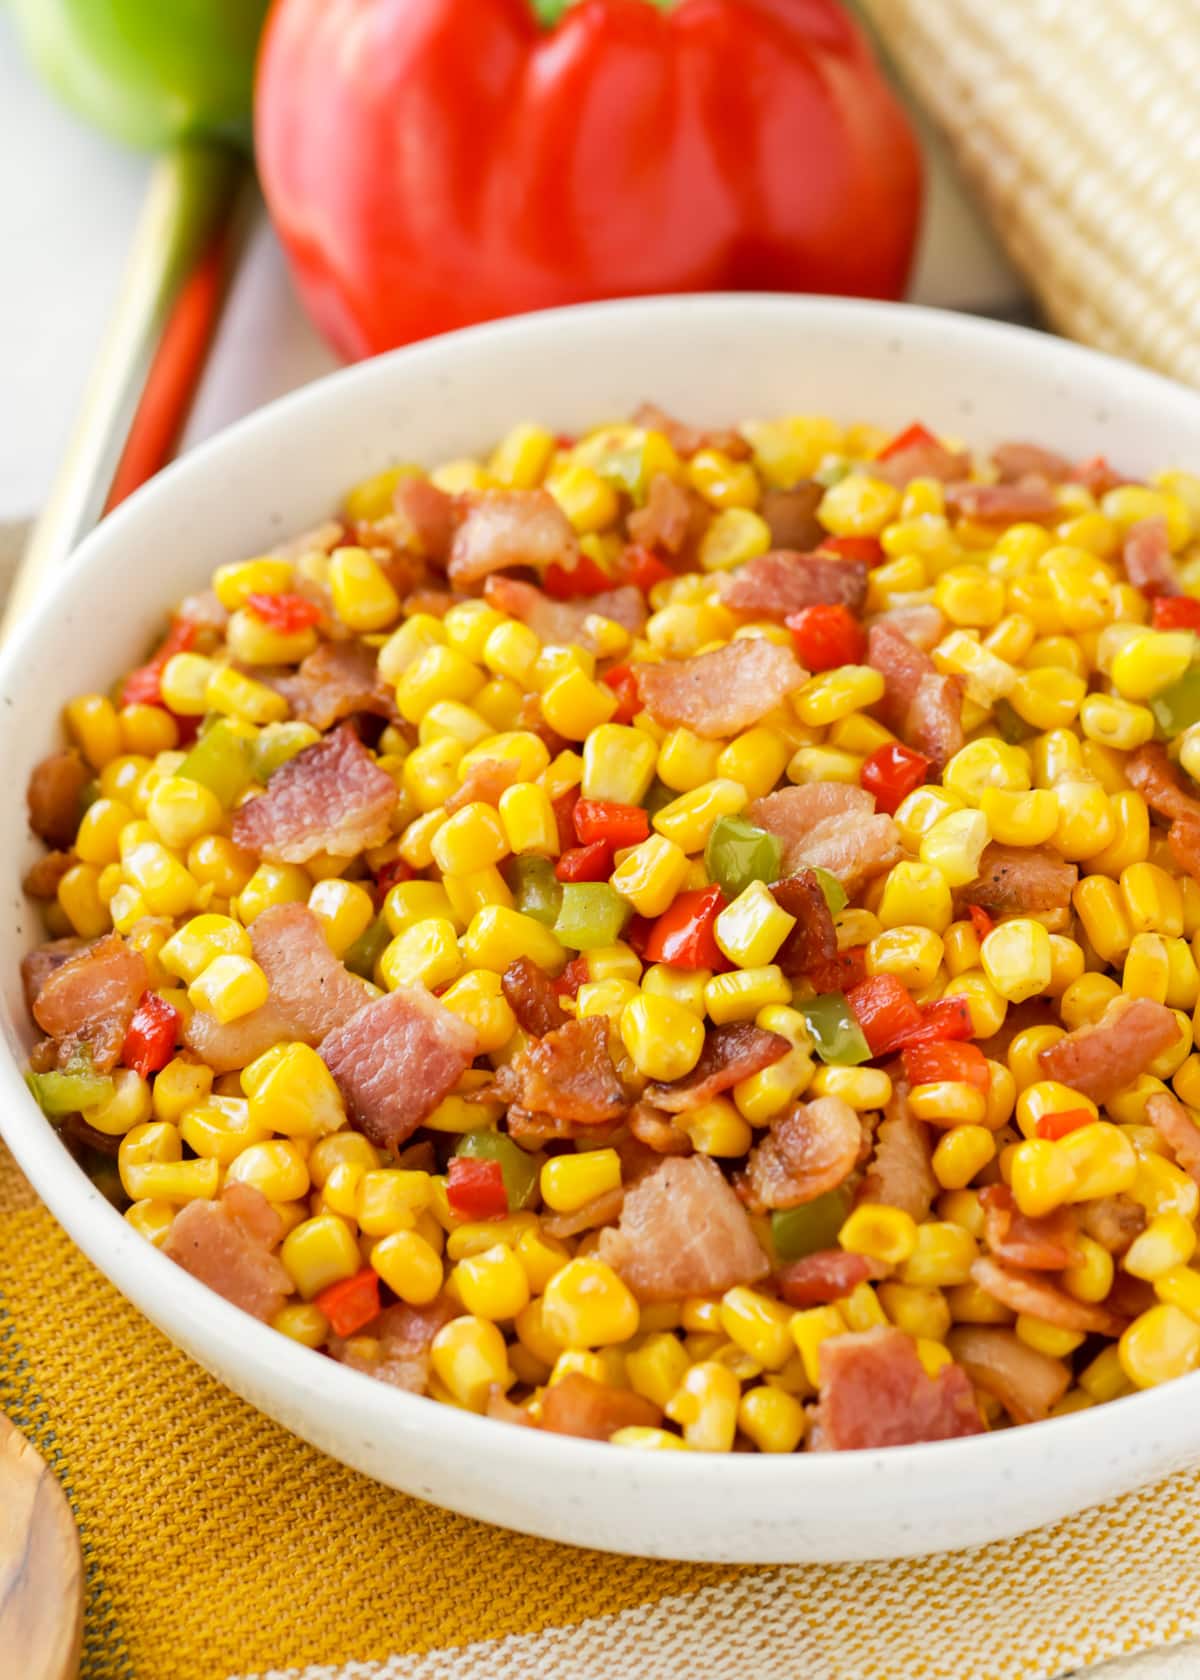 Close up of a white bowl filled with fried corn.